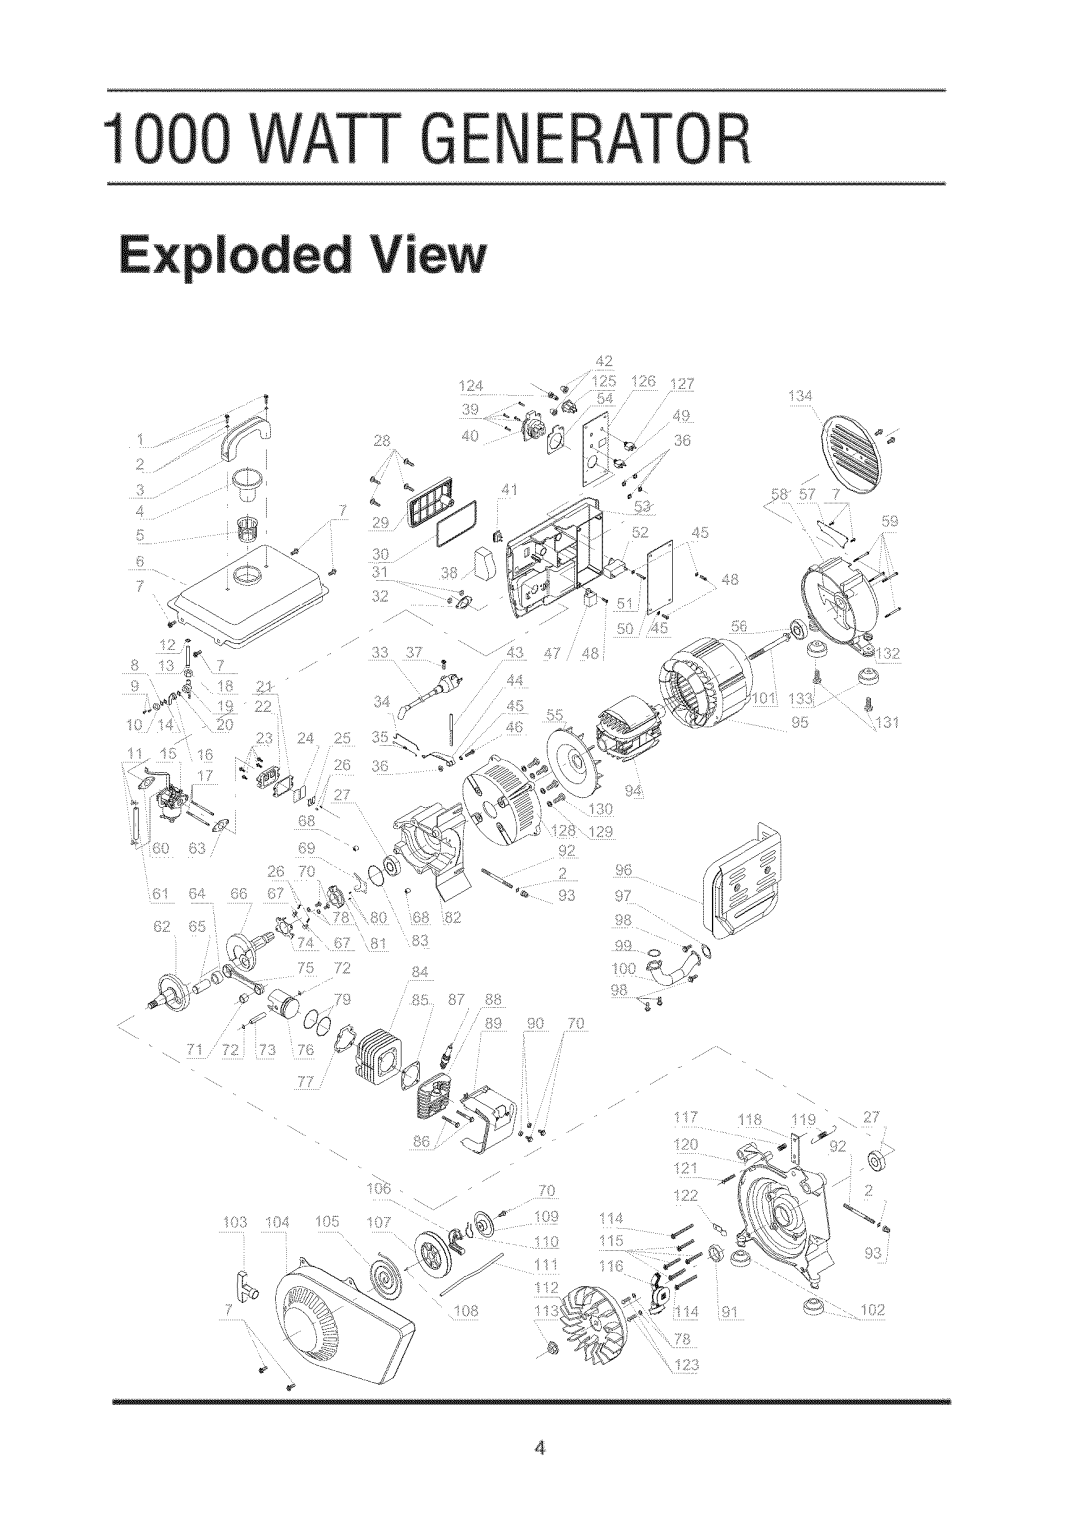 Sears APG3004A manual Gene R, Exploded View 